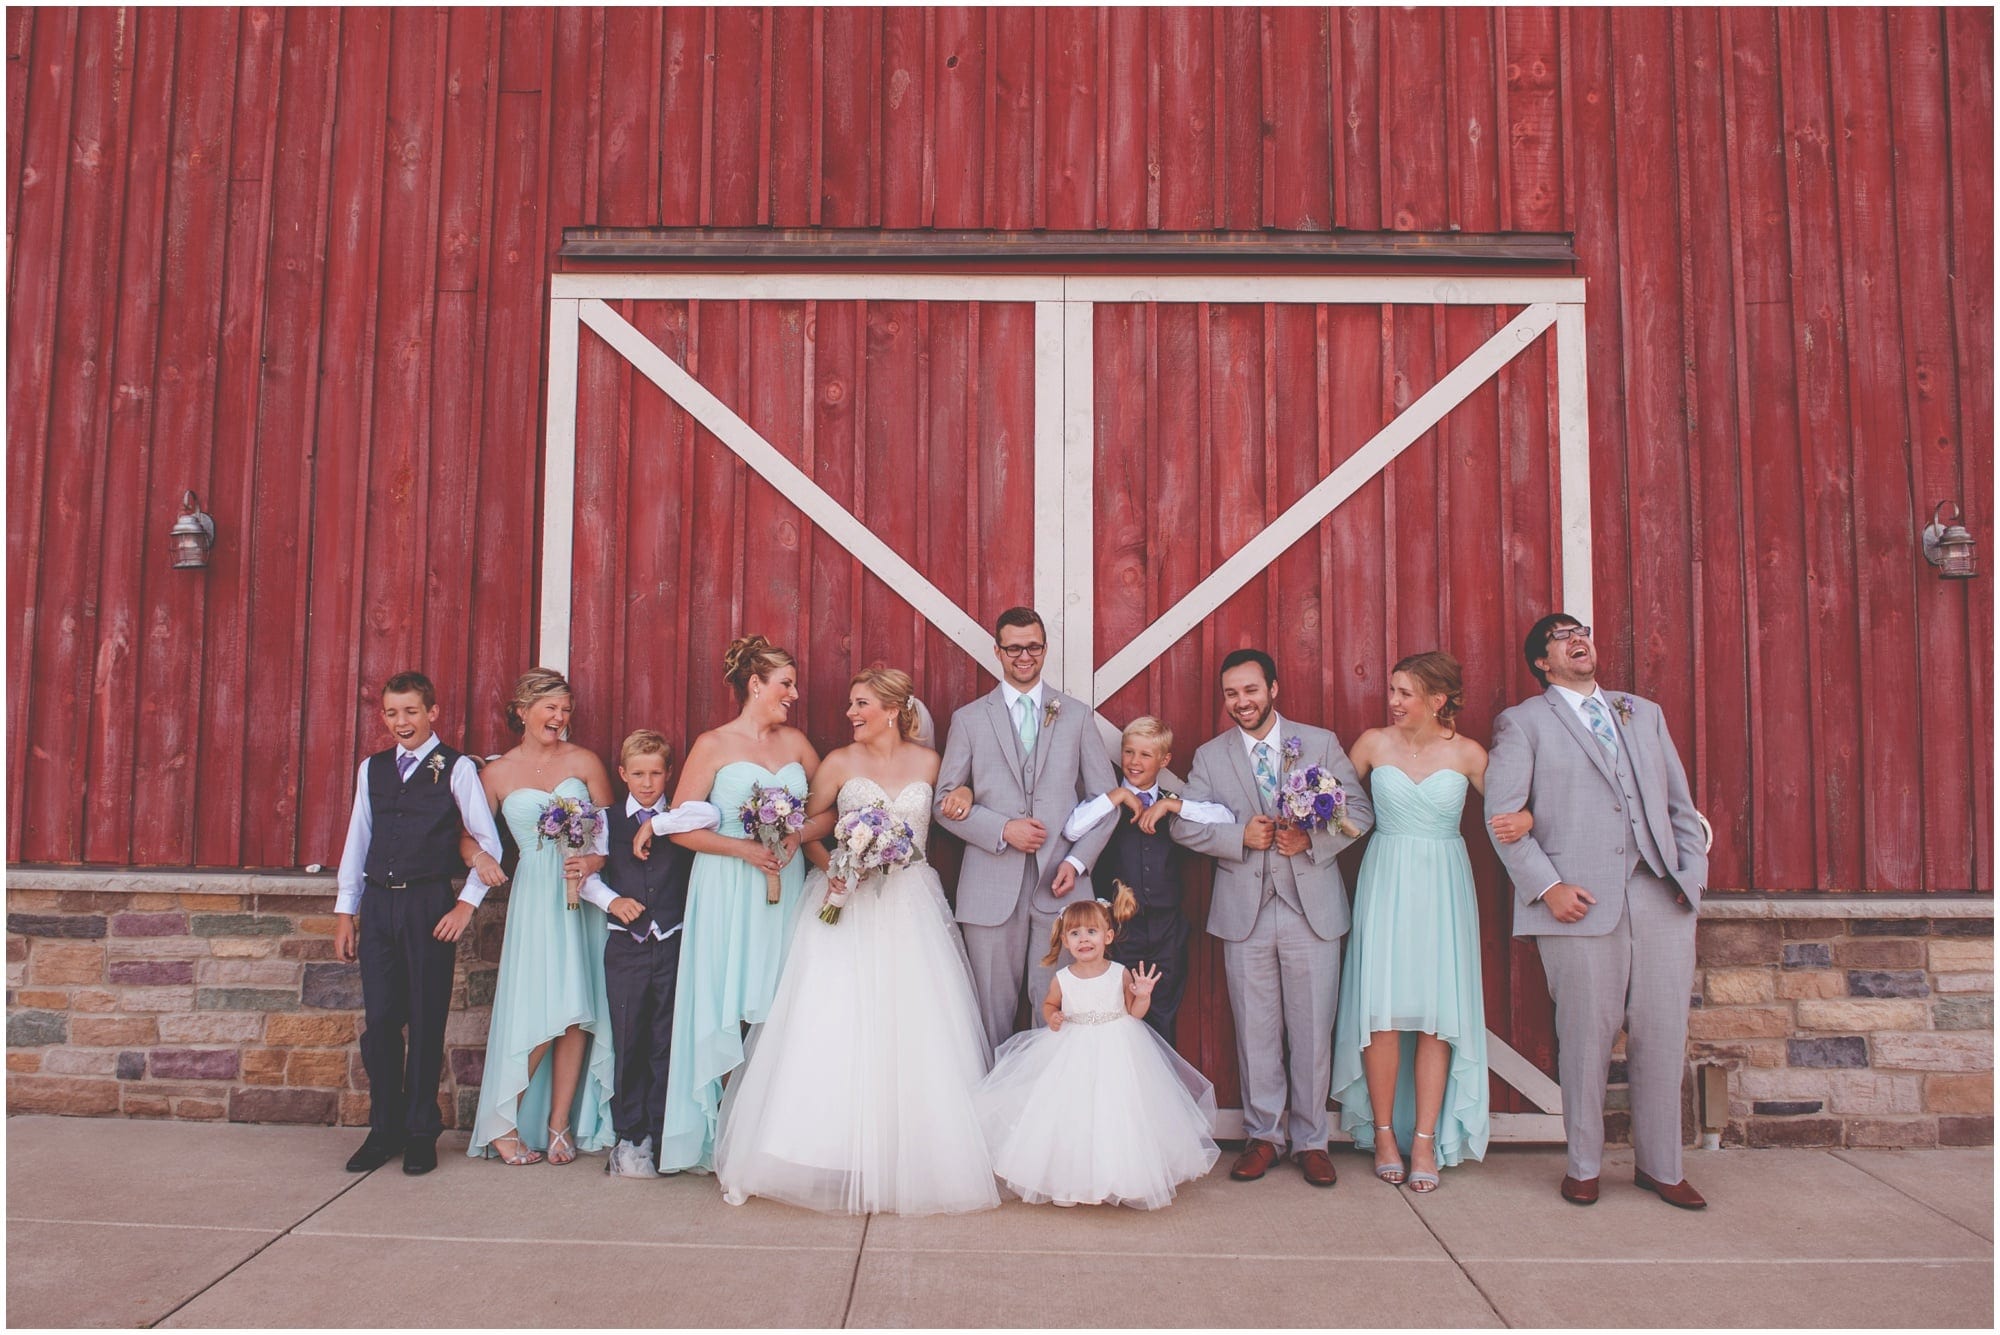 County Line Orchard Wedding Photographer wedding party in front of the red bard